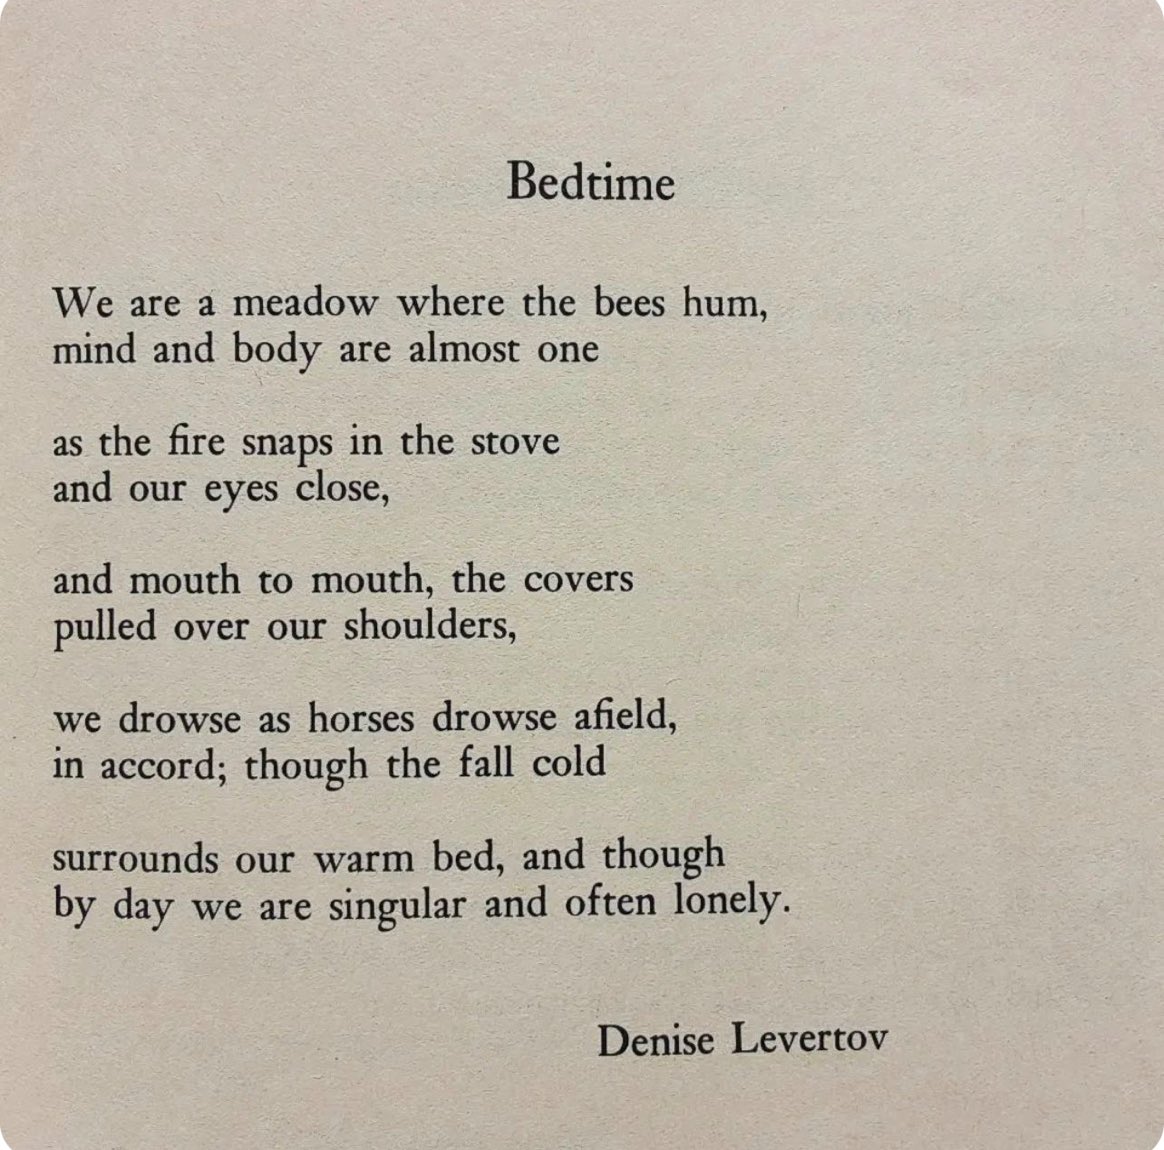 And here is an example of her poetry, at least a decade later • Denise Levertov • Collected poems 1960 -1967